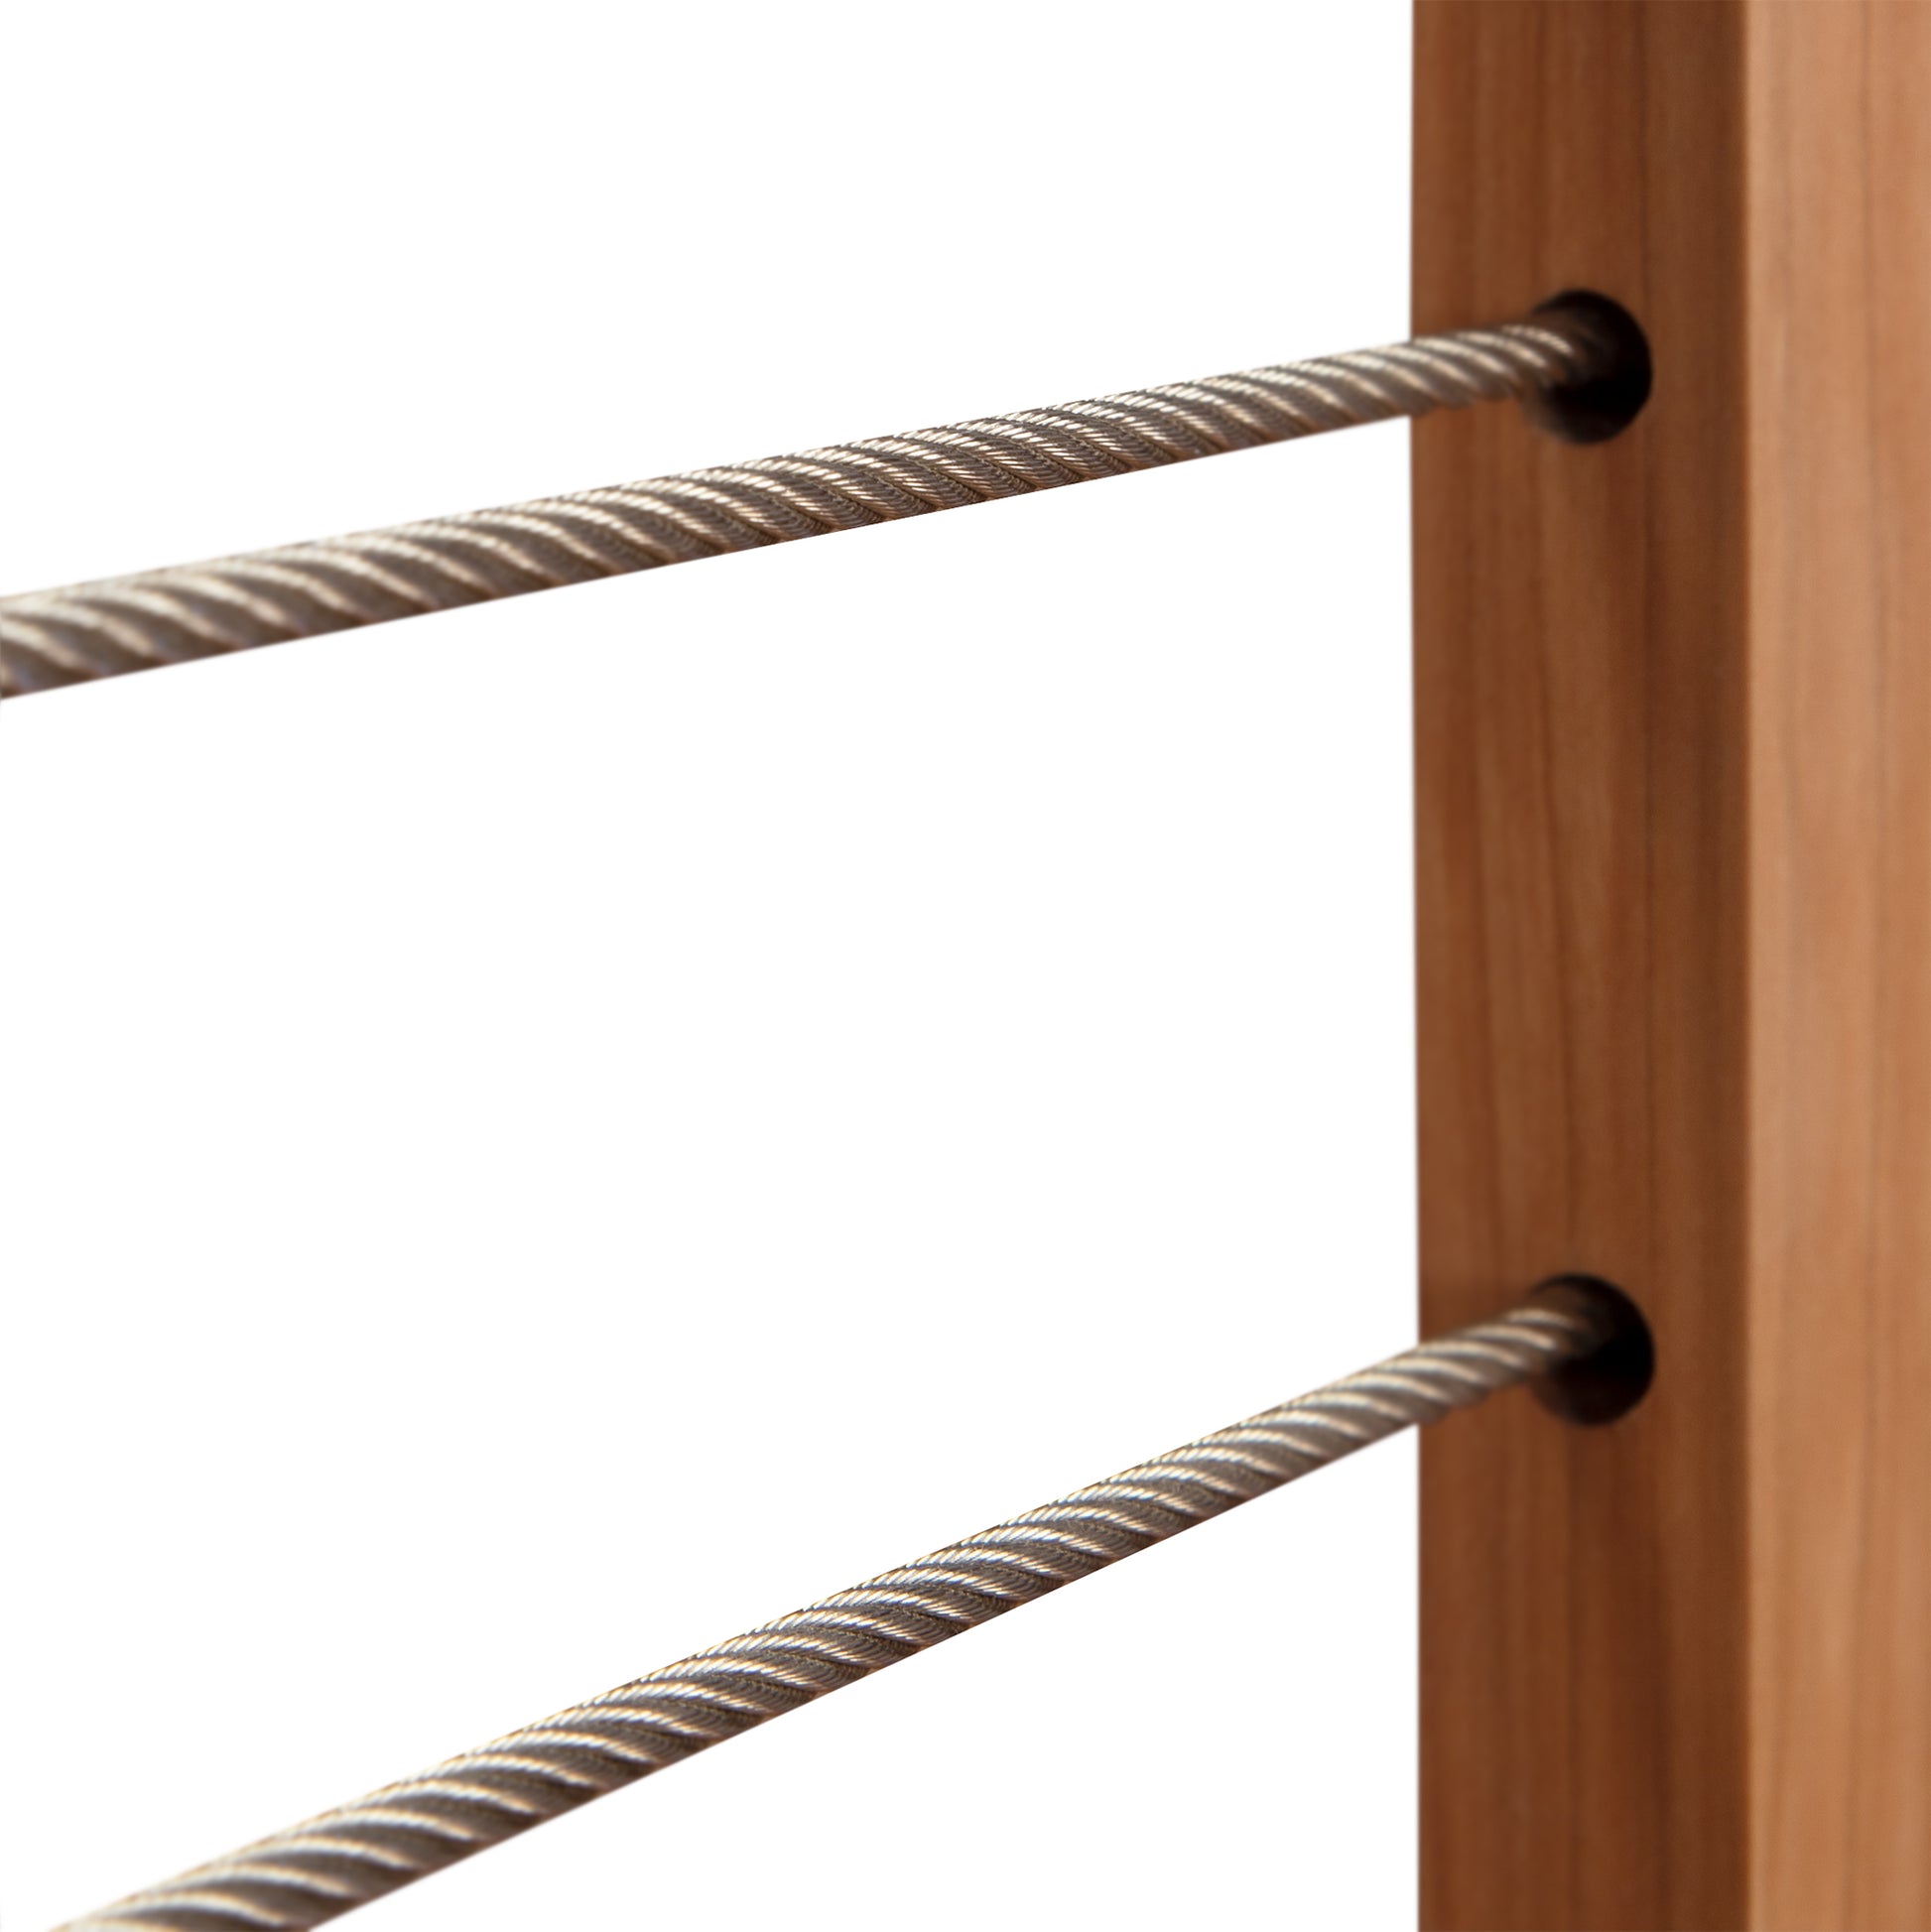 Three horizontal metal rods attached to a vertical solid hardwood post, isolated on a white background, Vermont Furniture Designs' Contemporary Cable Bed.